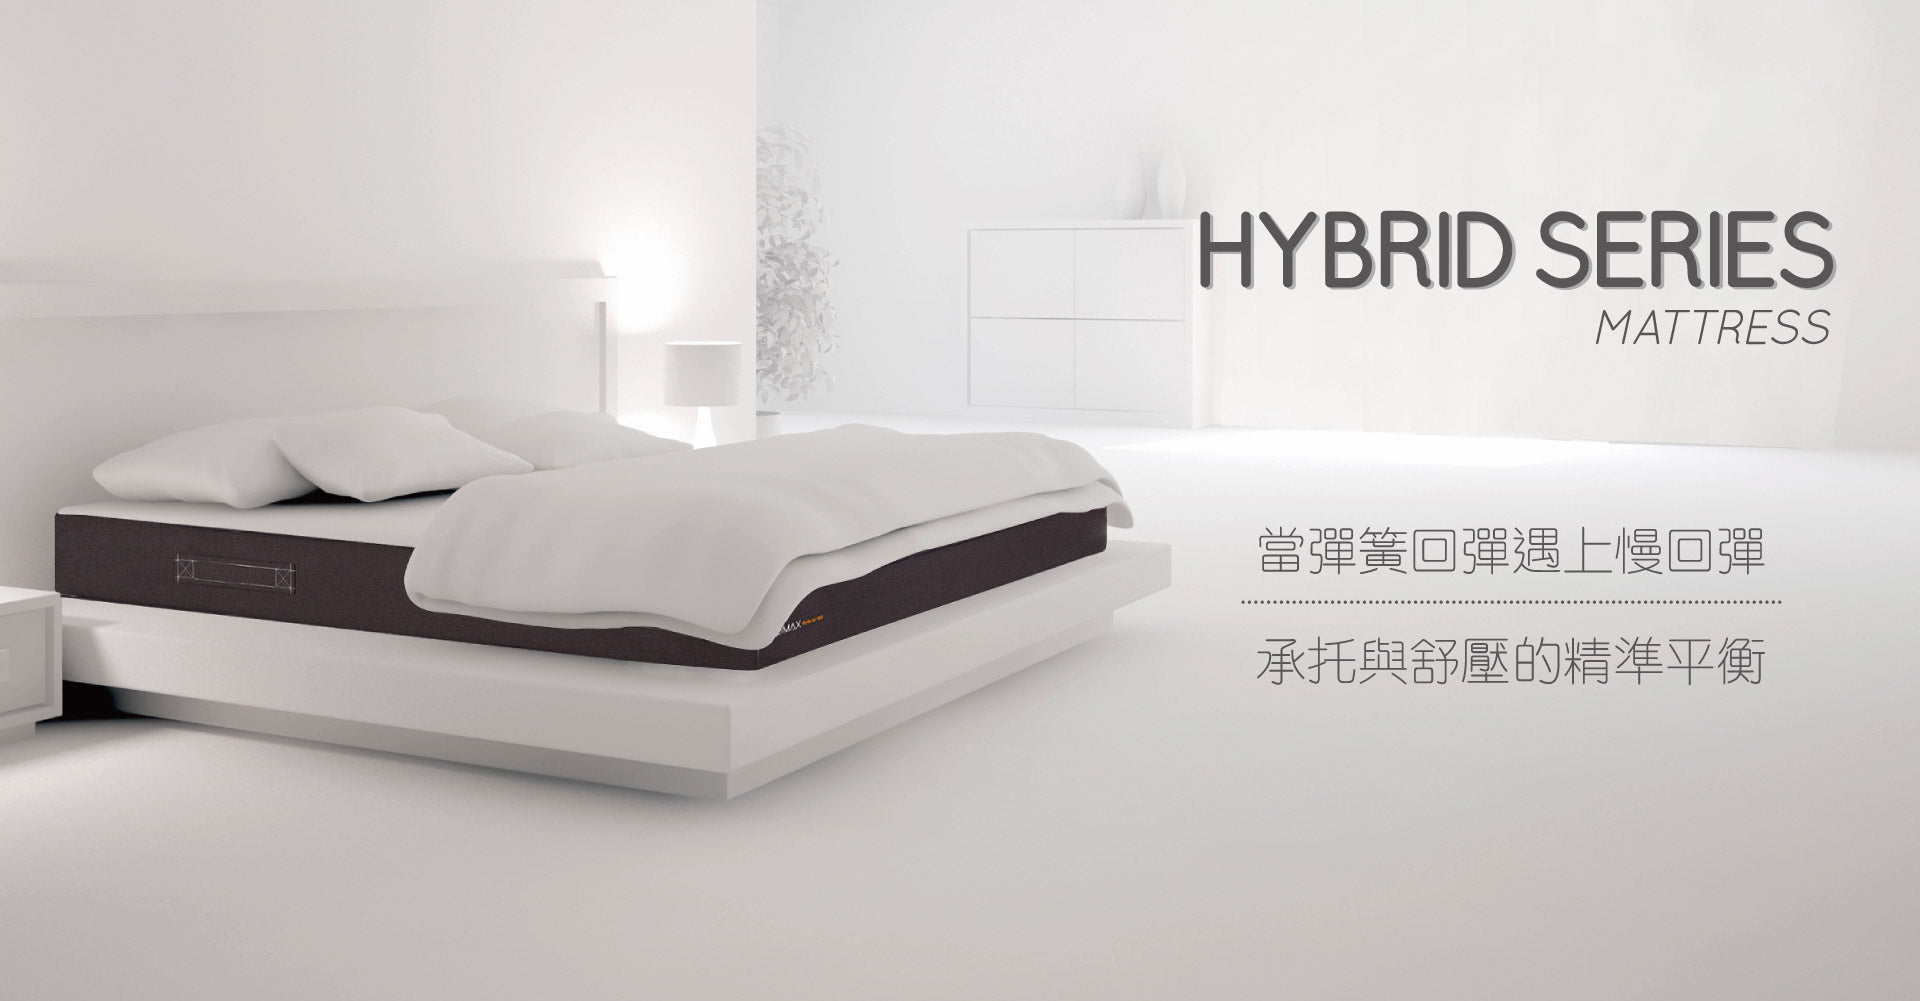 Hybrid 200 Pro Mattress - Tailor-made Size (48"W or below)